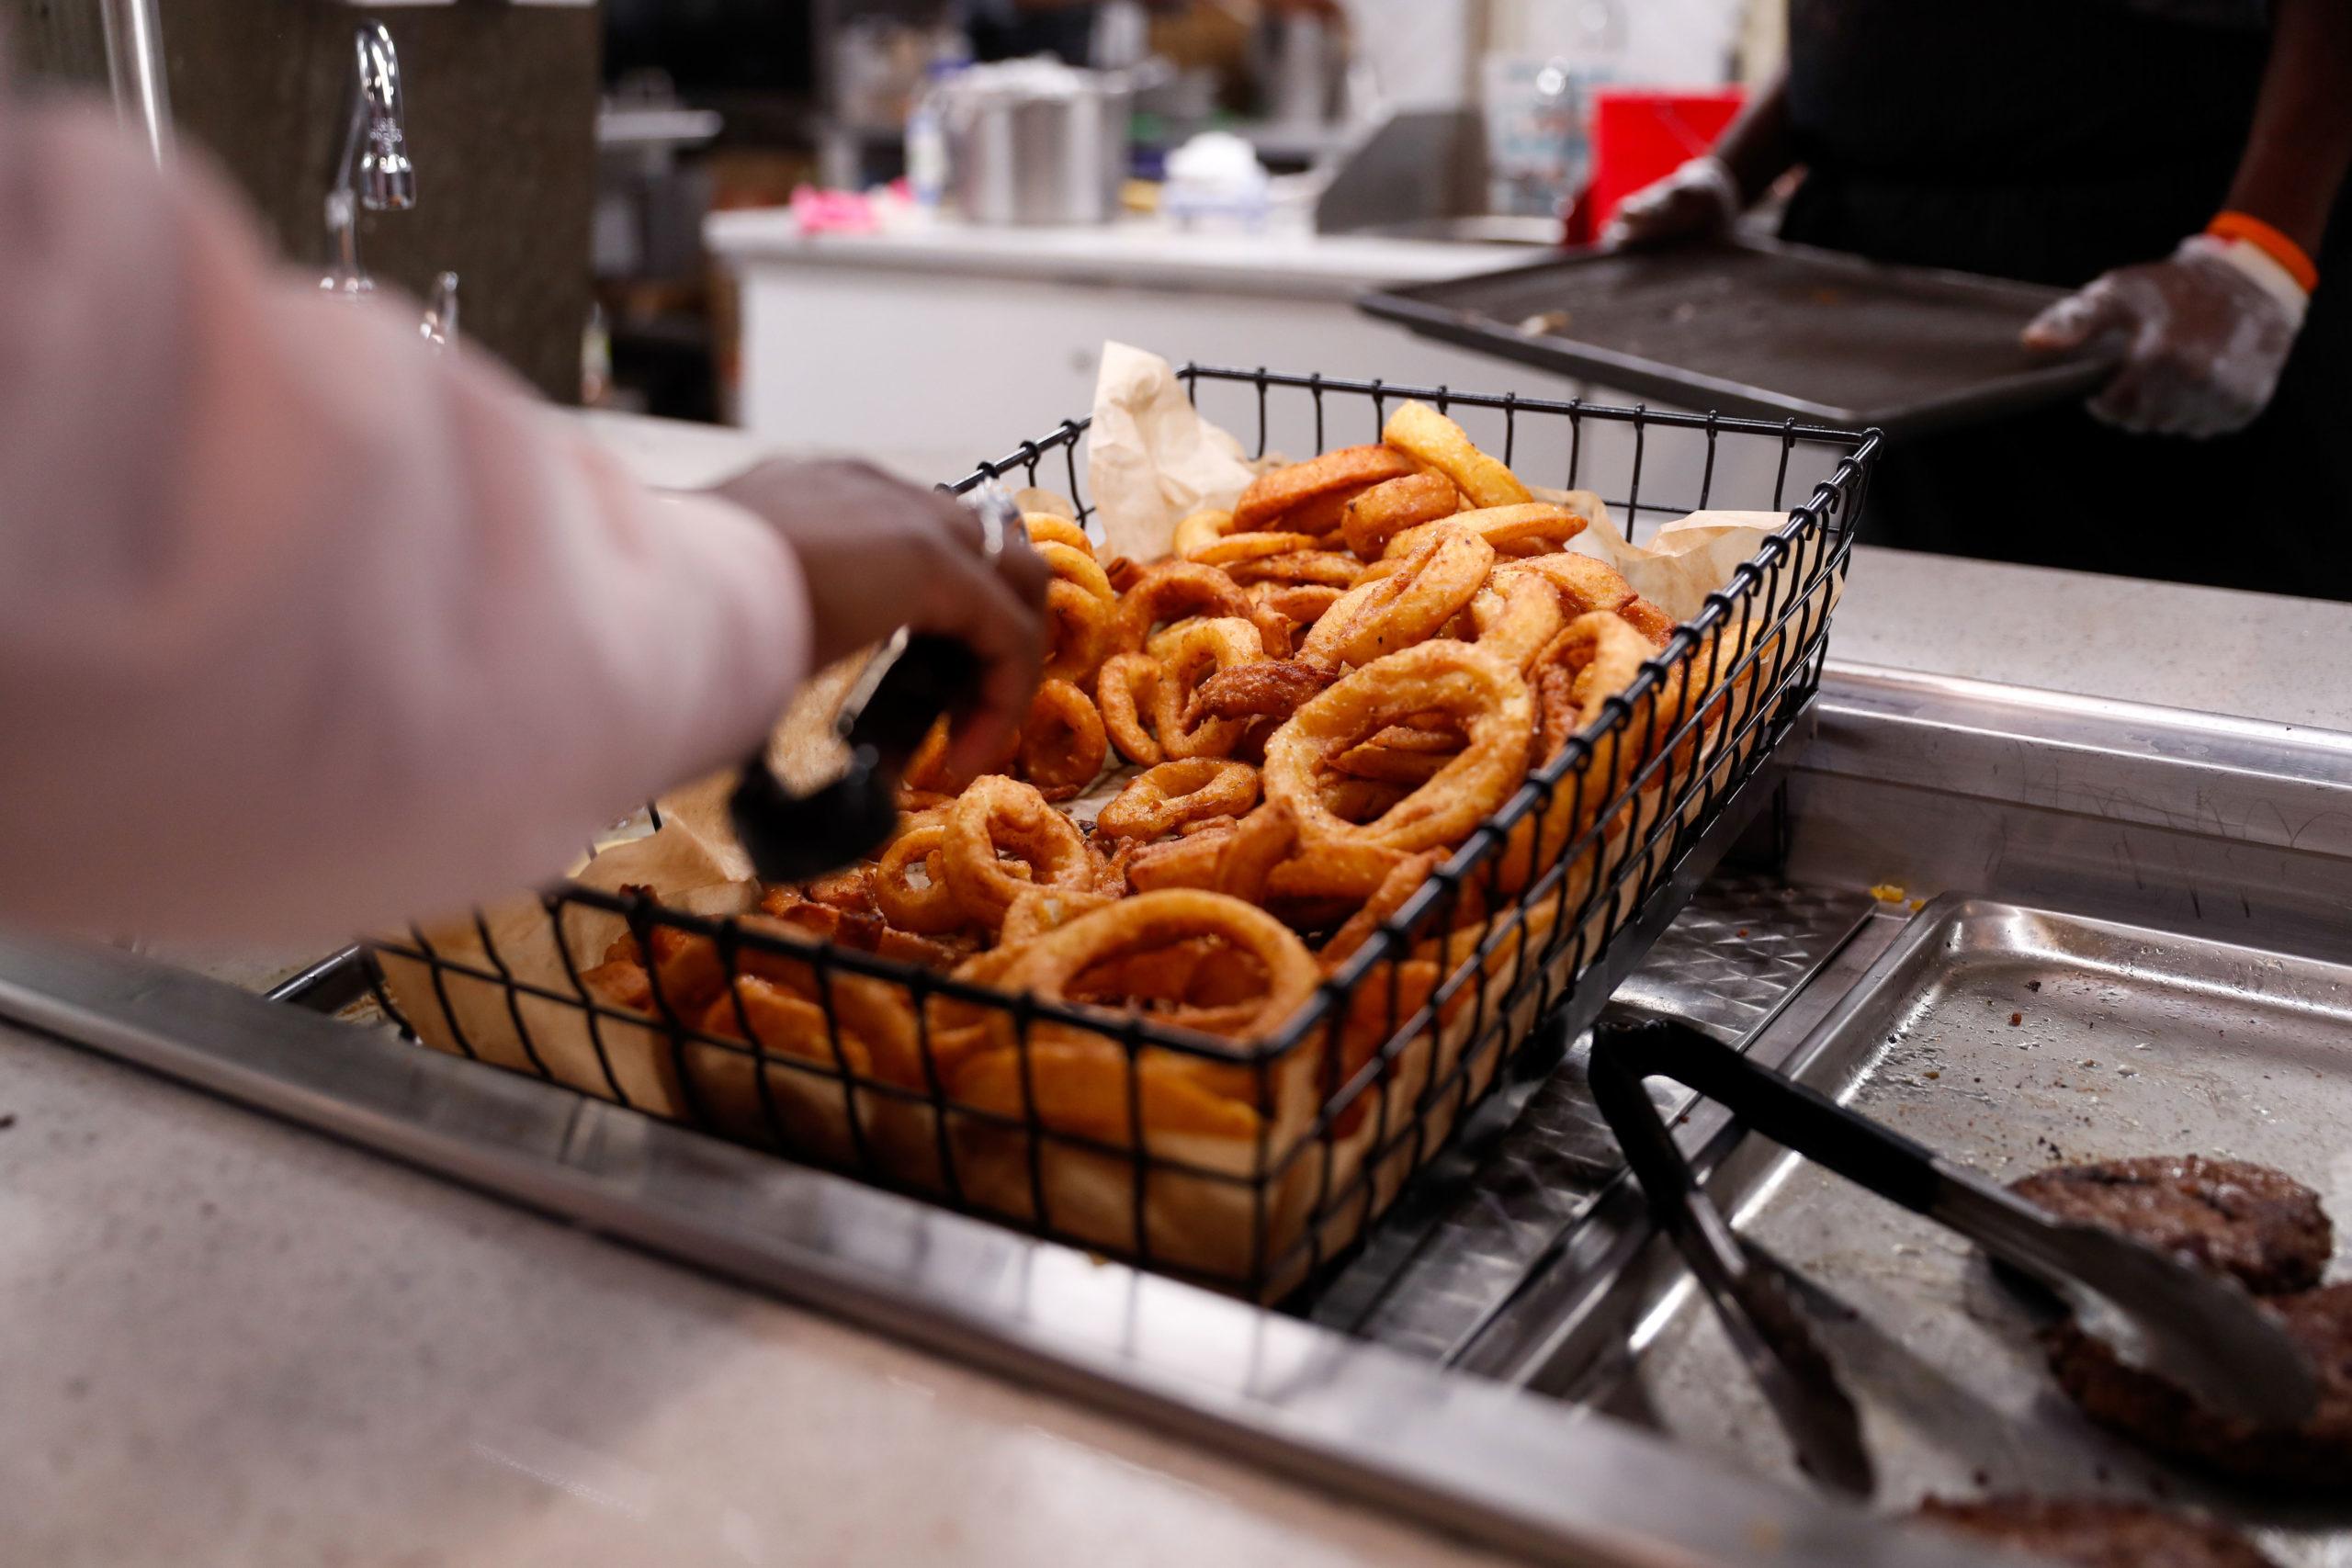 A student scoops up a fresh batch of onion rings at Shenkman Dining Hall.